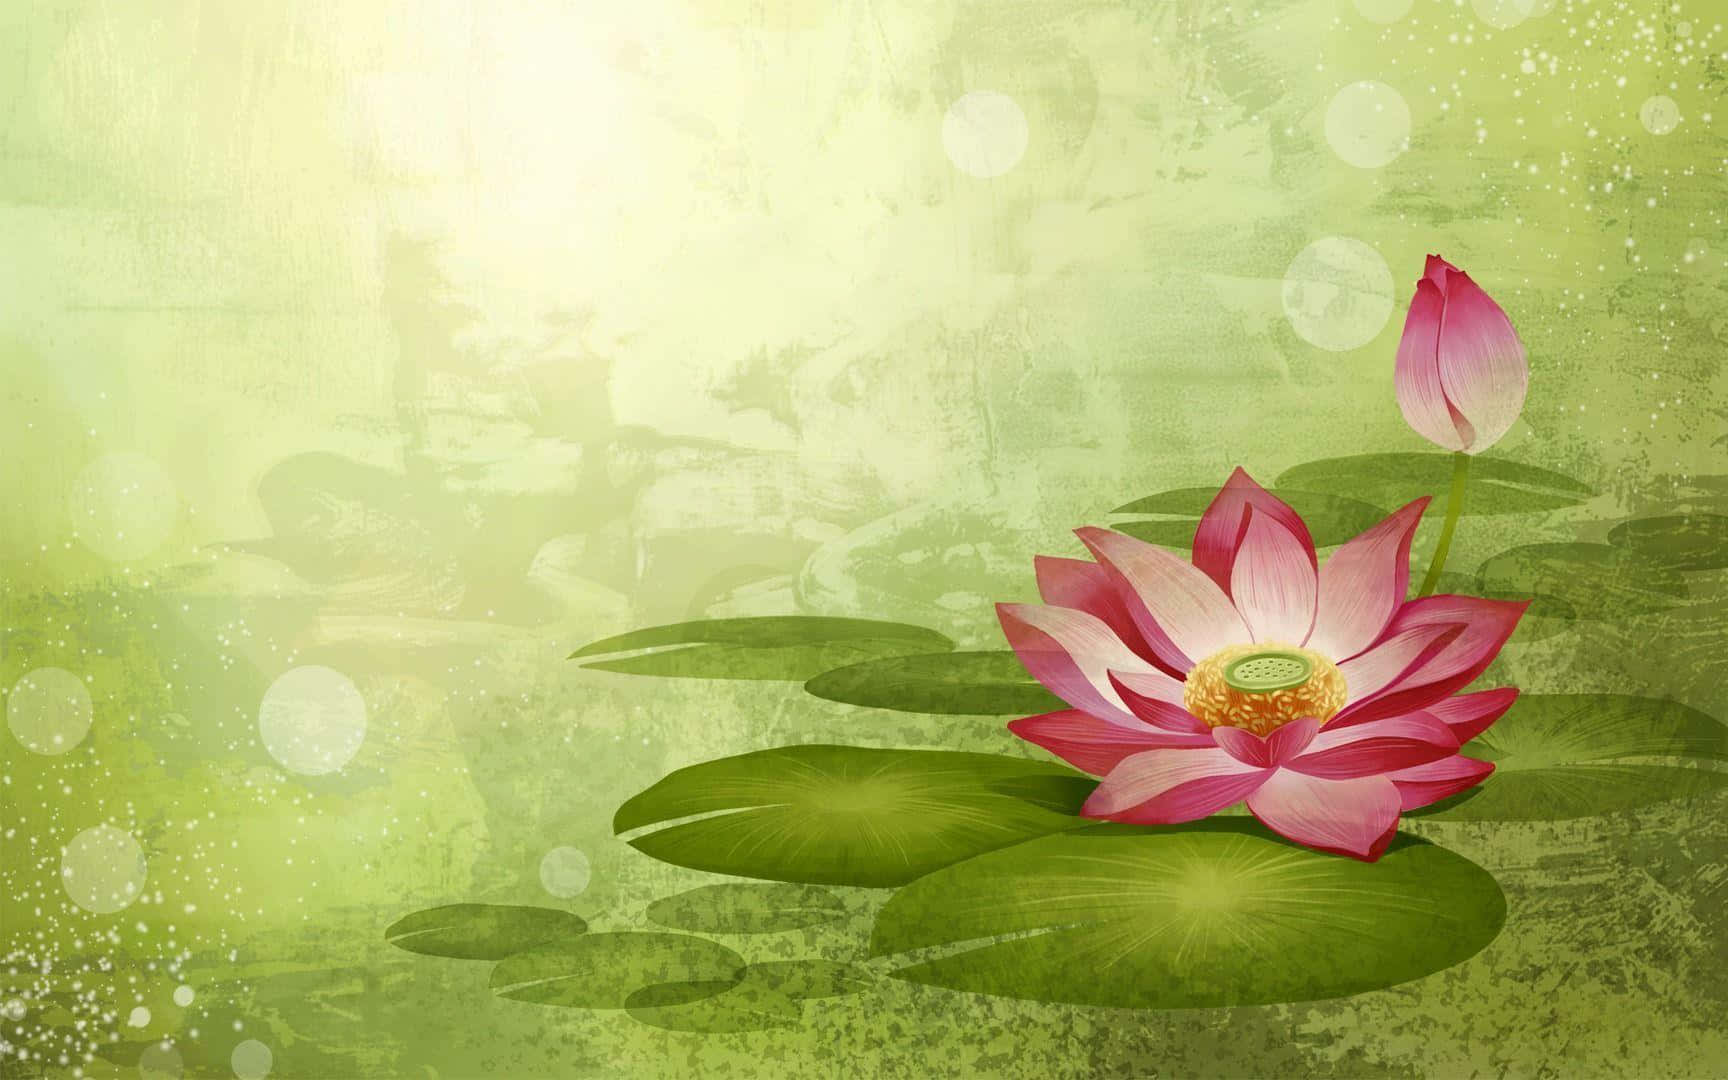 A Lotus Flower Reminds Us To Grow Through Life's Challenging Times